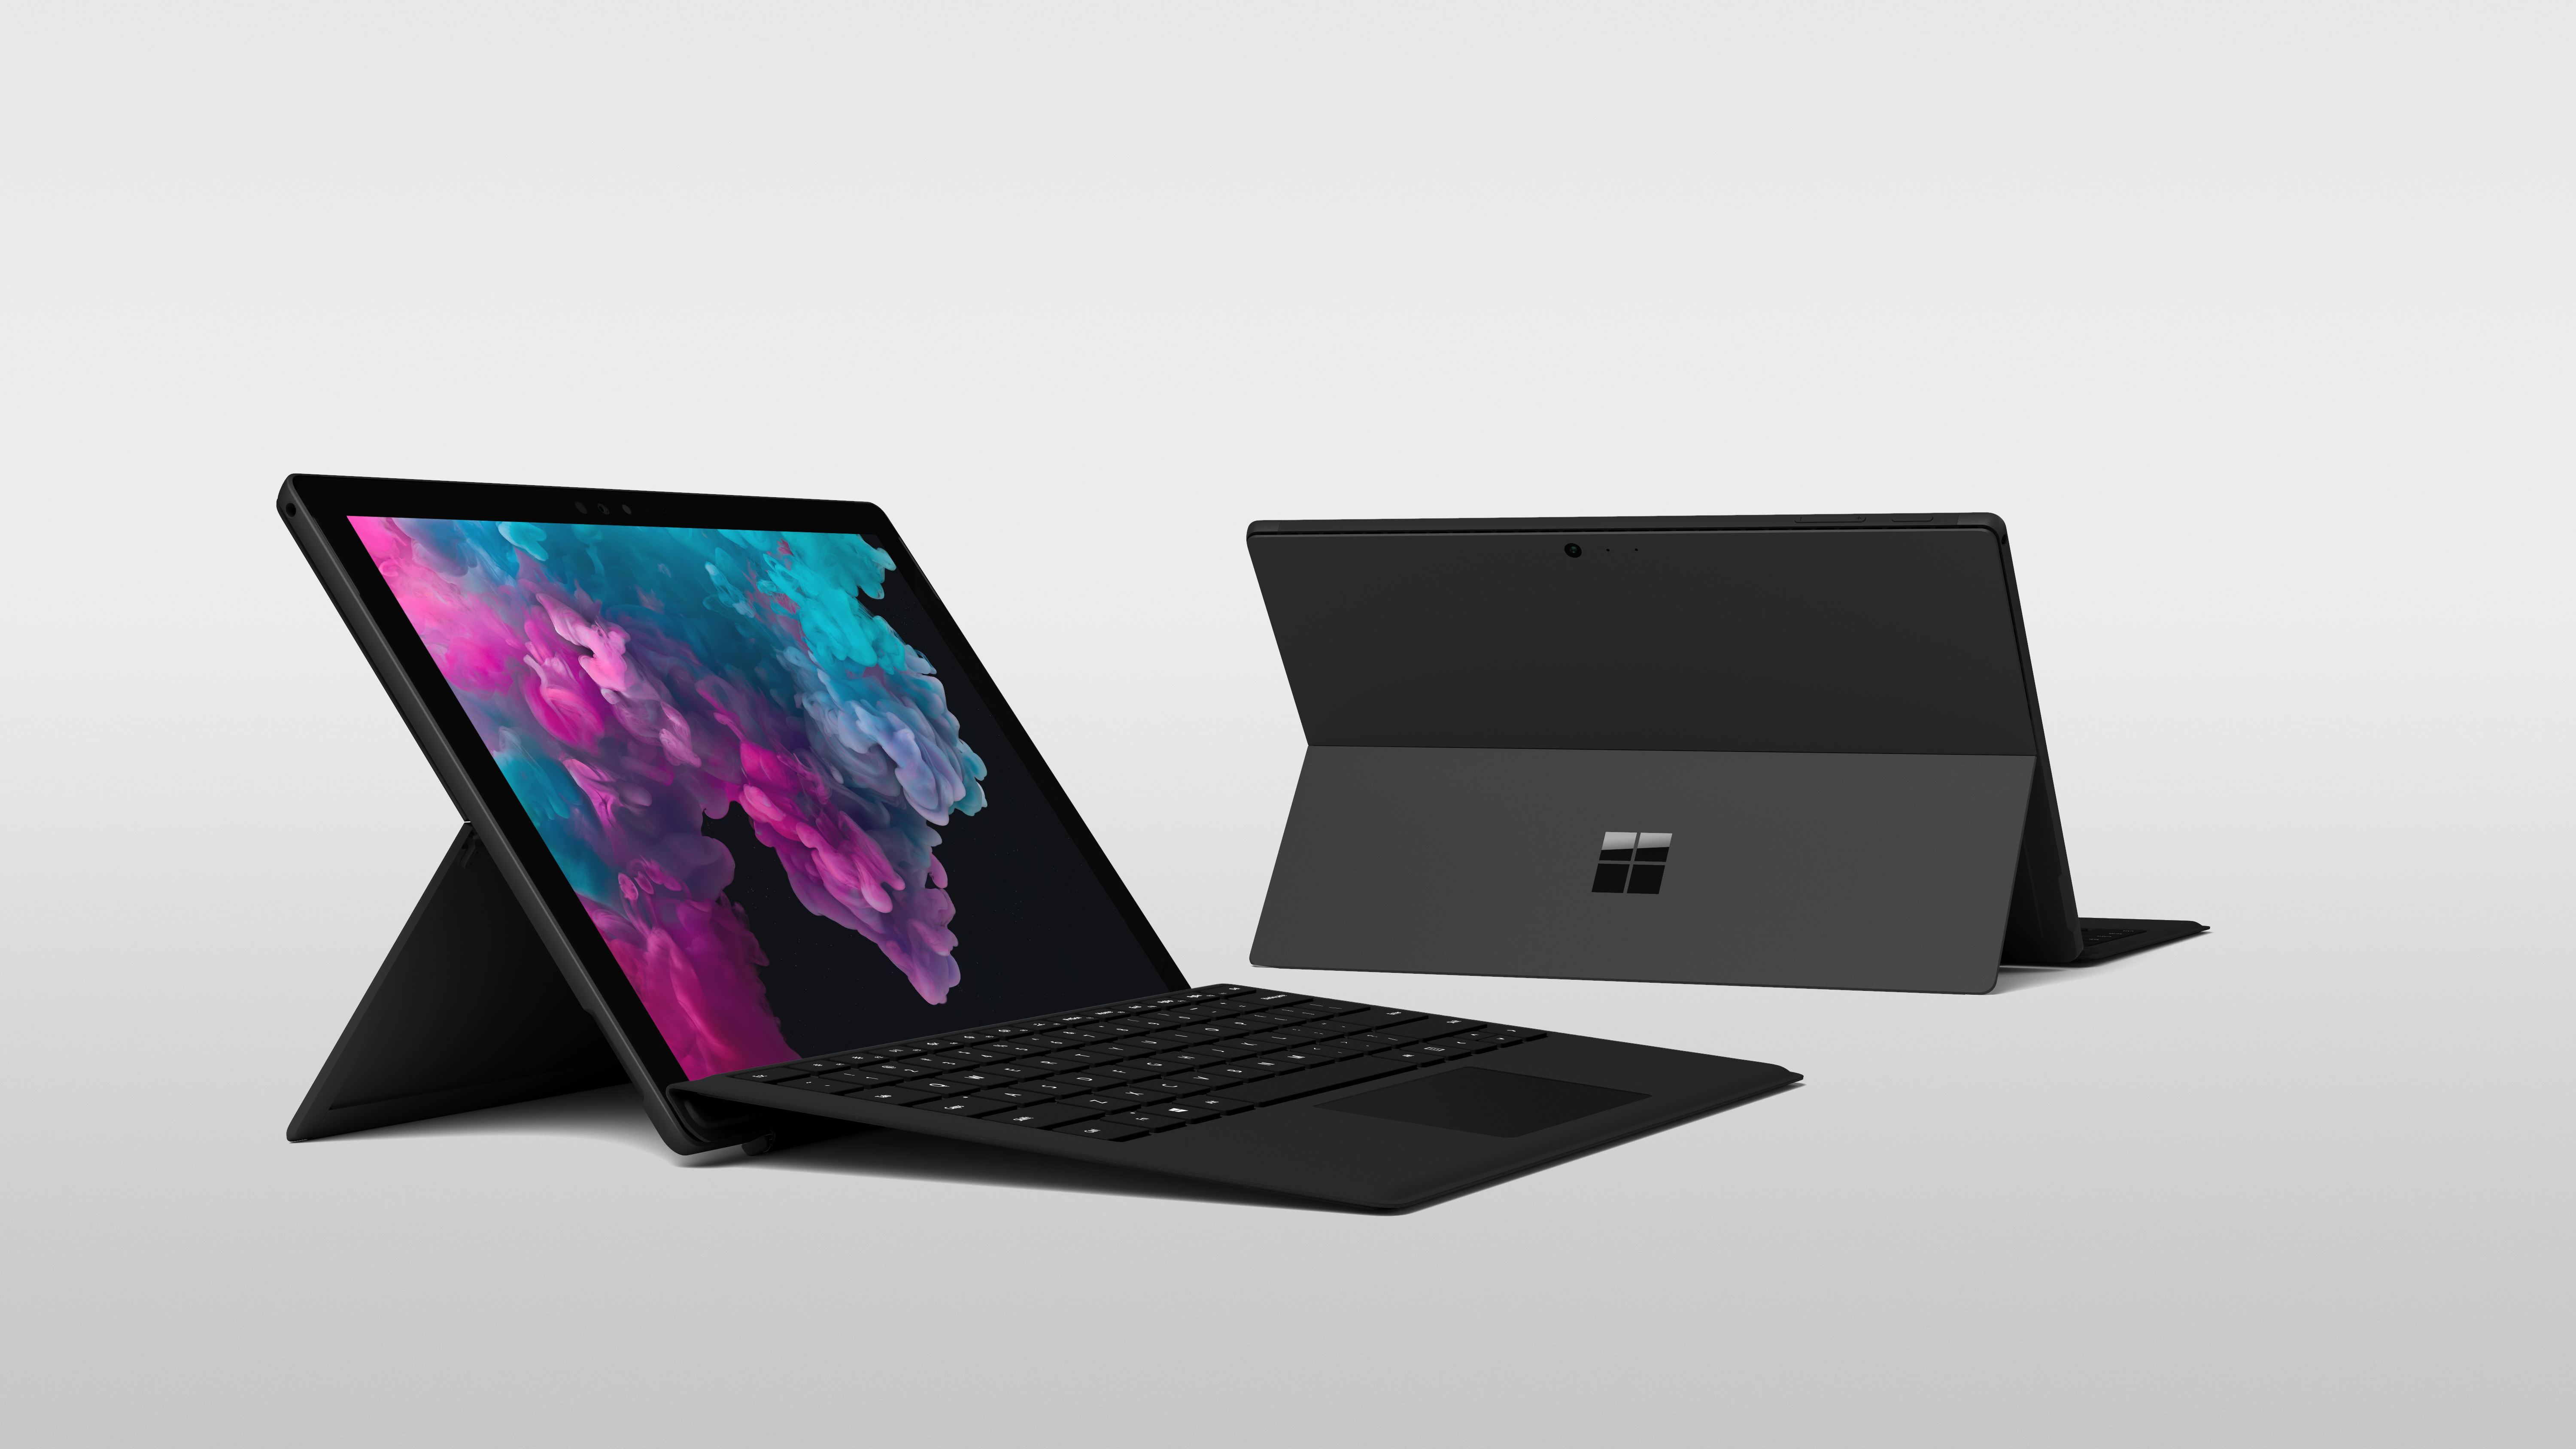 Surface Pro 6 and Surface Laptop 2: New internals, new color, old